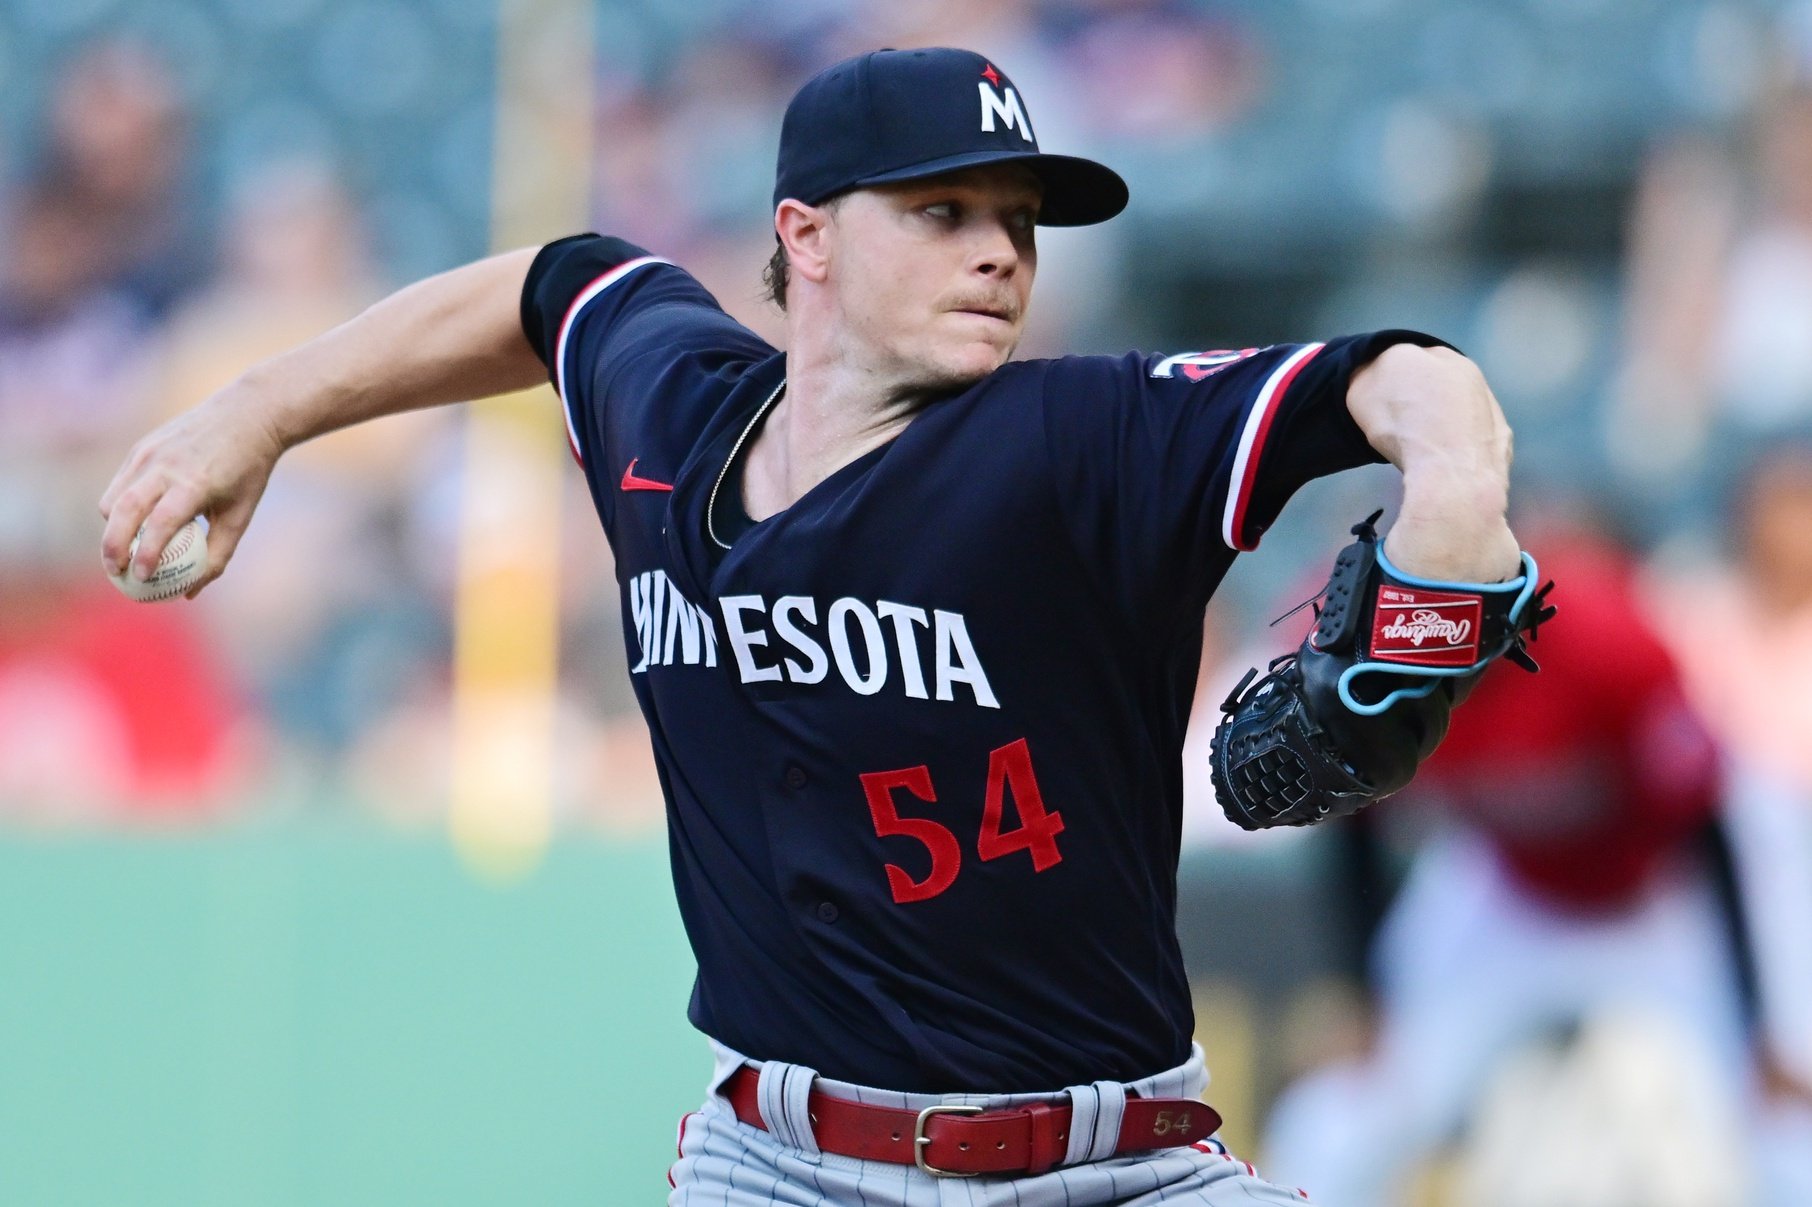 Sonny Gray rips Yankees for forcing him to throw the wrong breaking ball,  but the stats disagree 